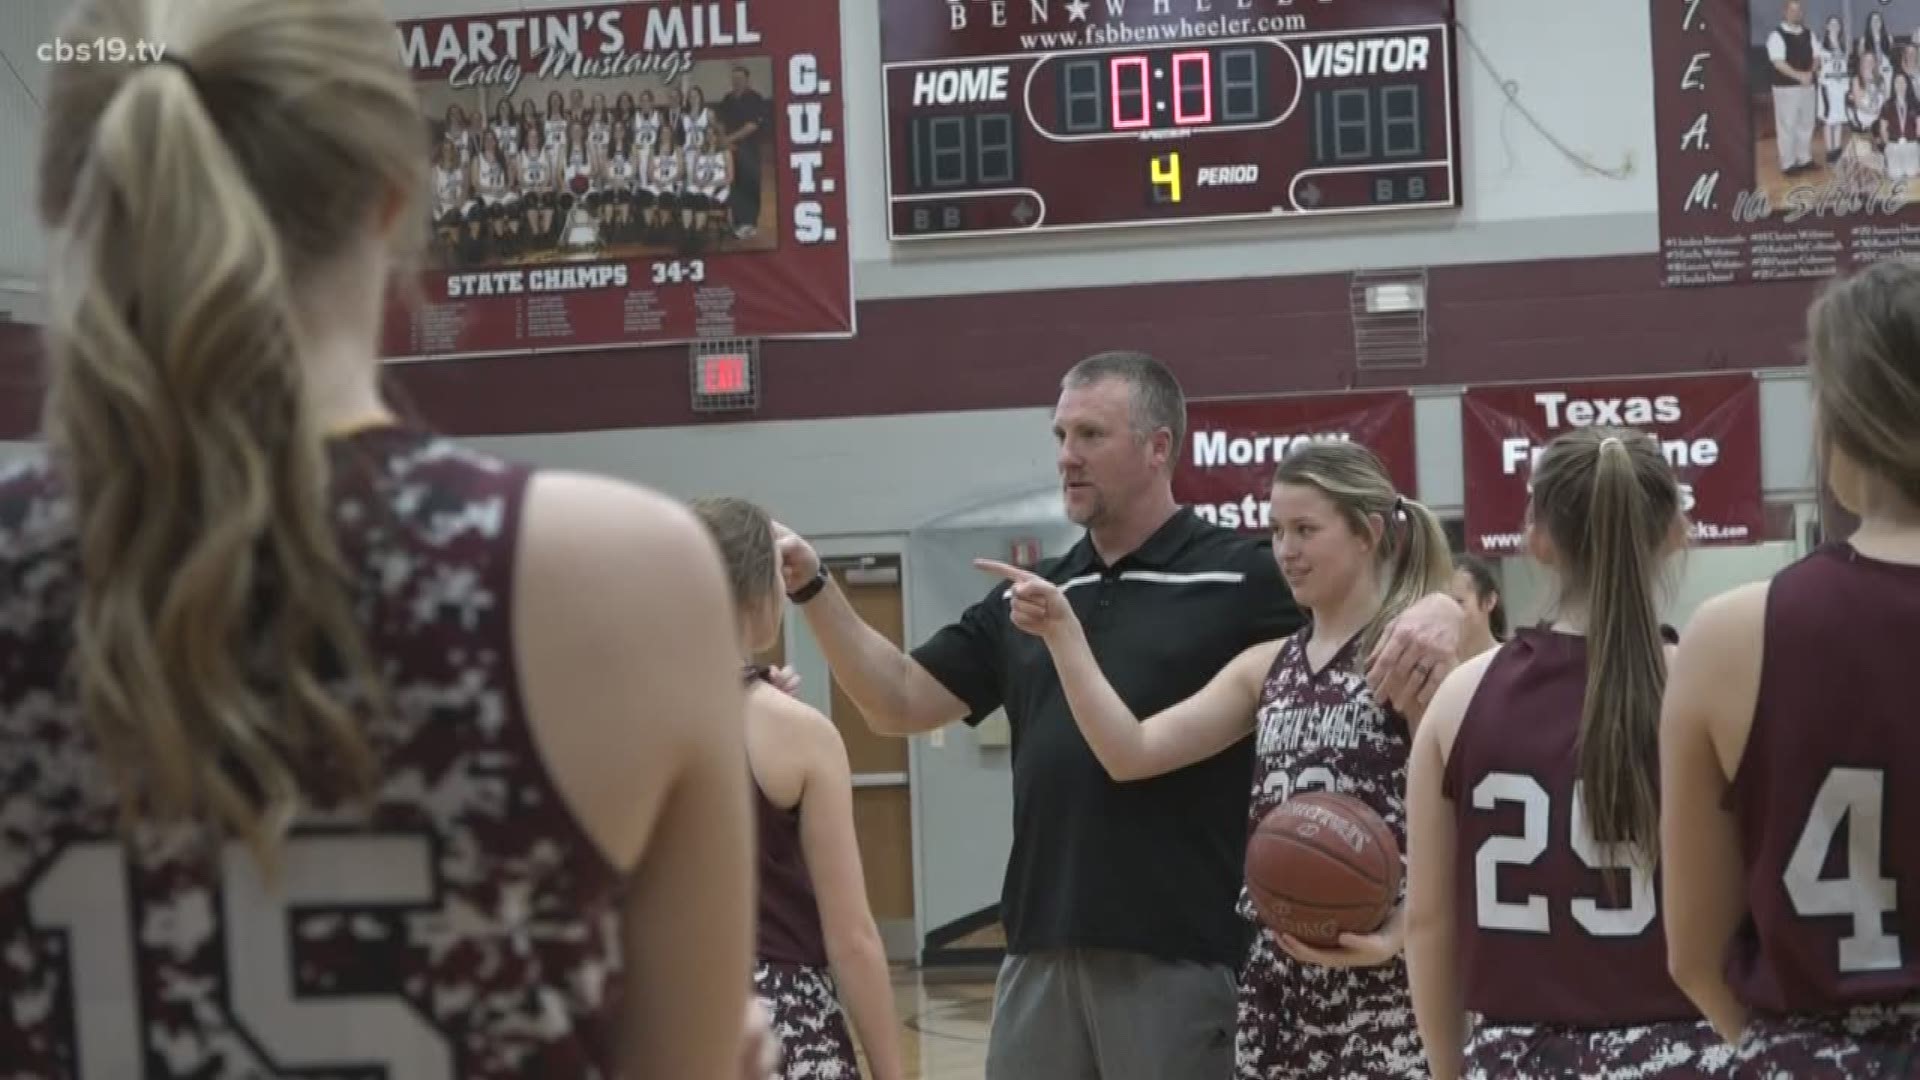 The Martin's Mills Girls Basketball team is one of only two East Texas Teams that remains undefeated in the 2018-2019 season.